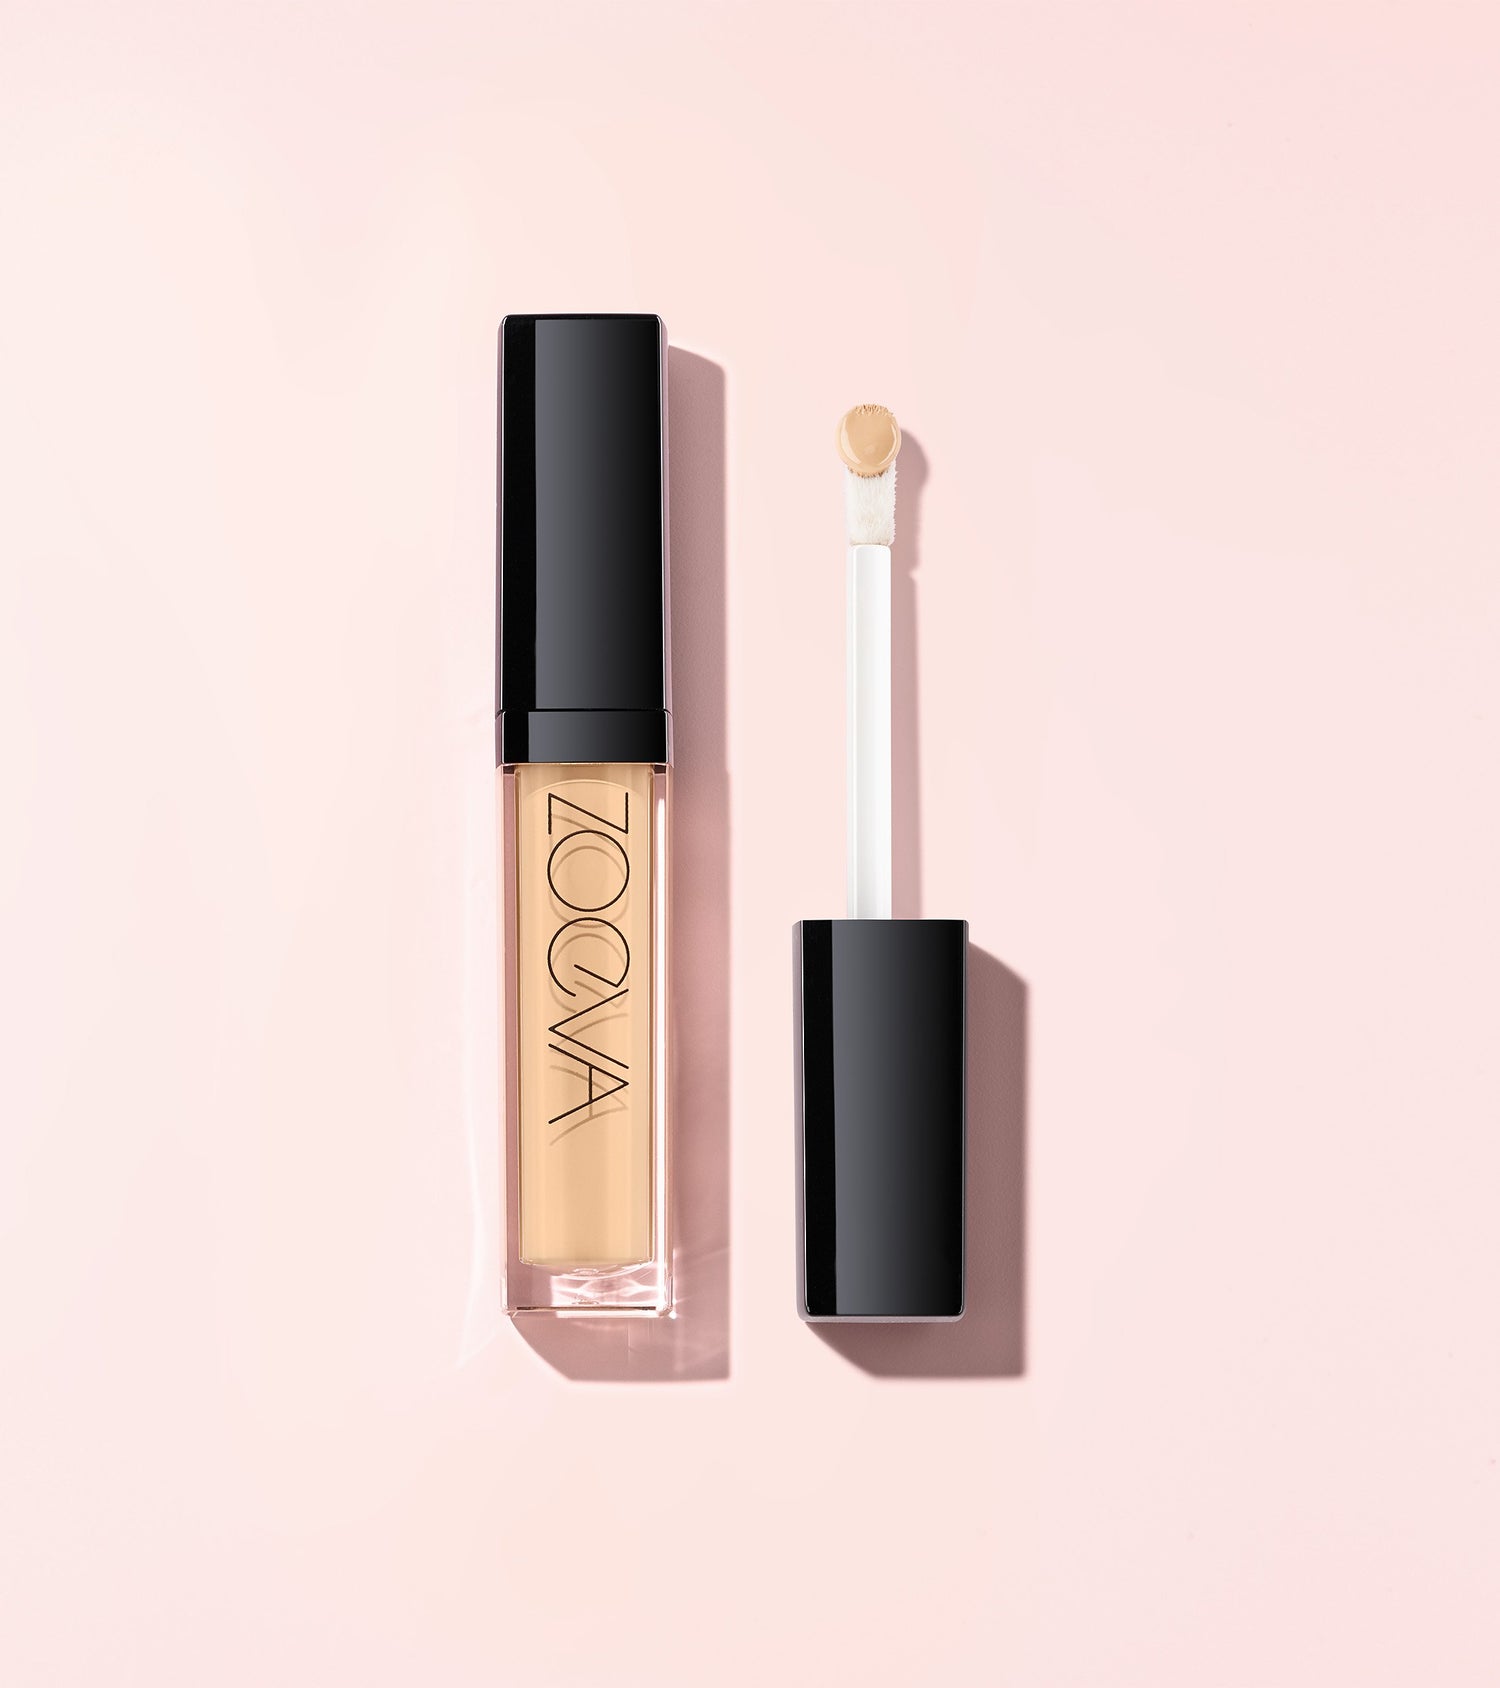 AUTHENTIK SKIN PERFECTOR CONCEALER (190 POSITIVE) Main Image featured